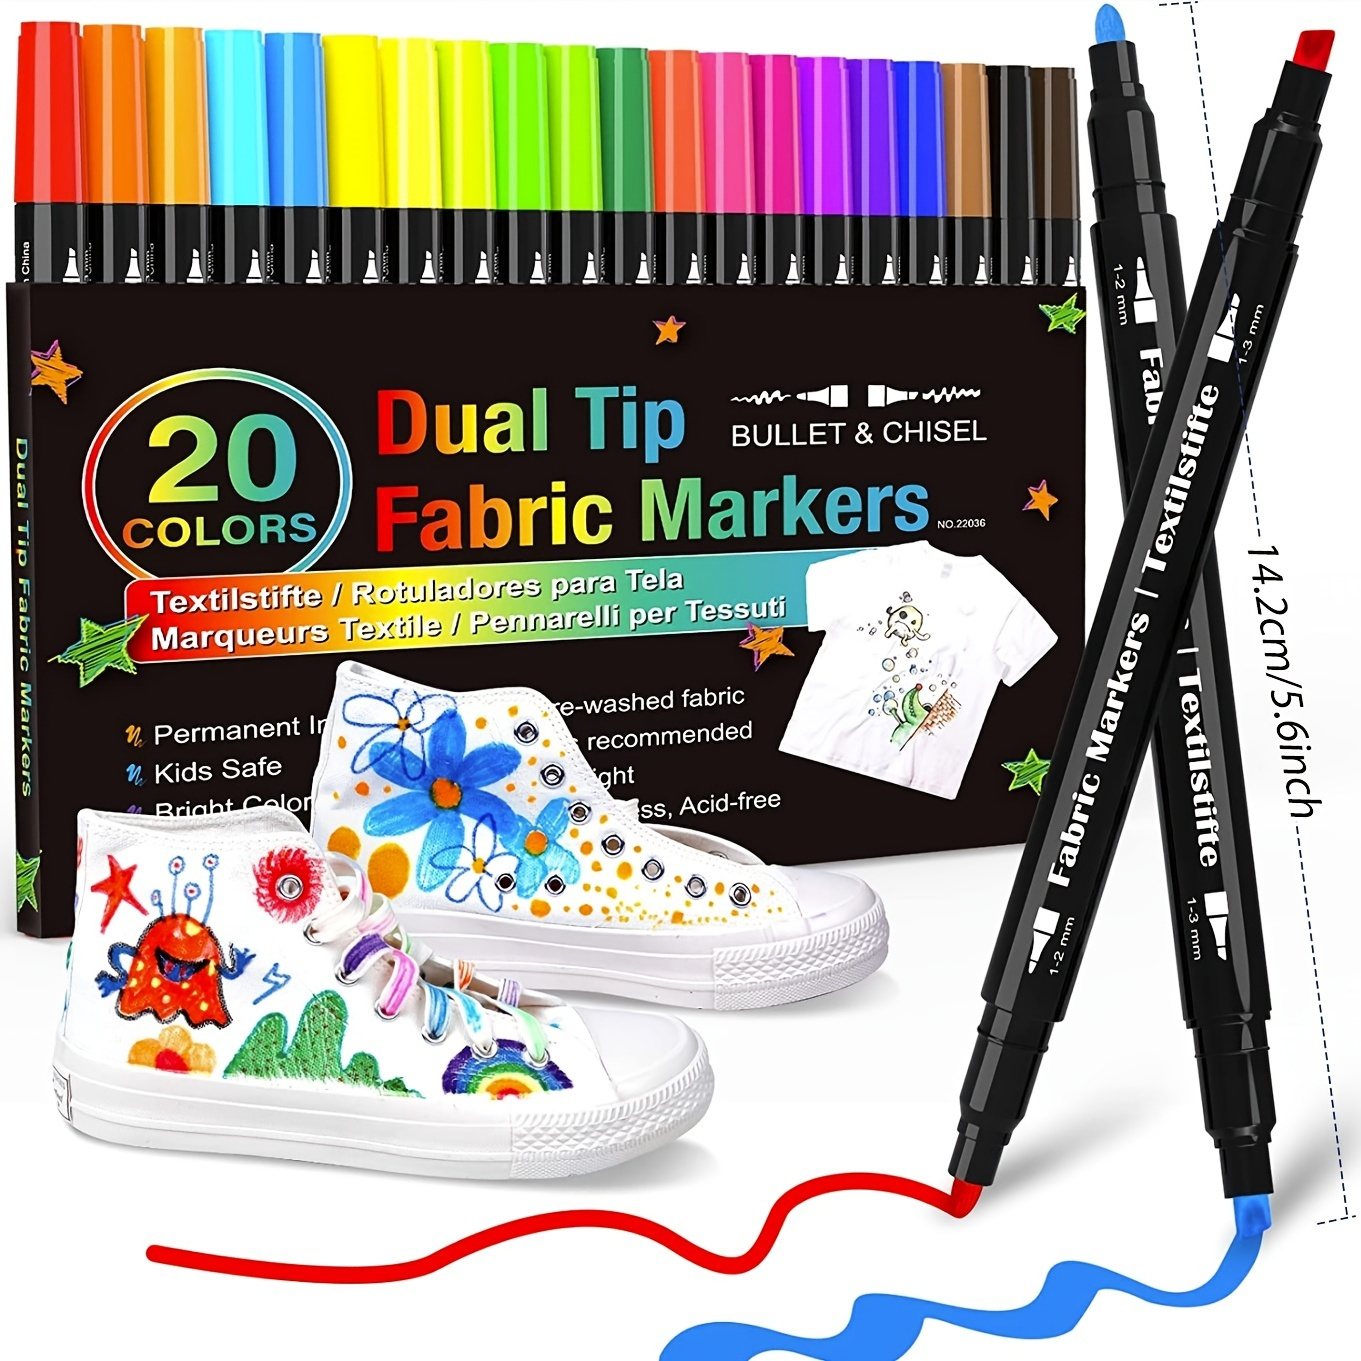 Fabric Markers Permanent for Clothes, 24 Colors Fabric Pens No Bleed, Fine  Tip for Kids, Non-Toxic Markers Paint for Tote Bag White Shirt Baby Bibs